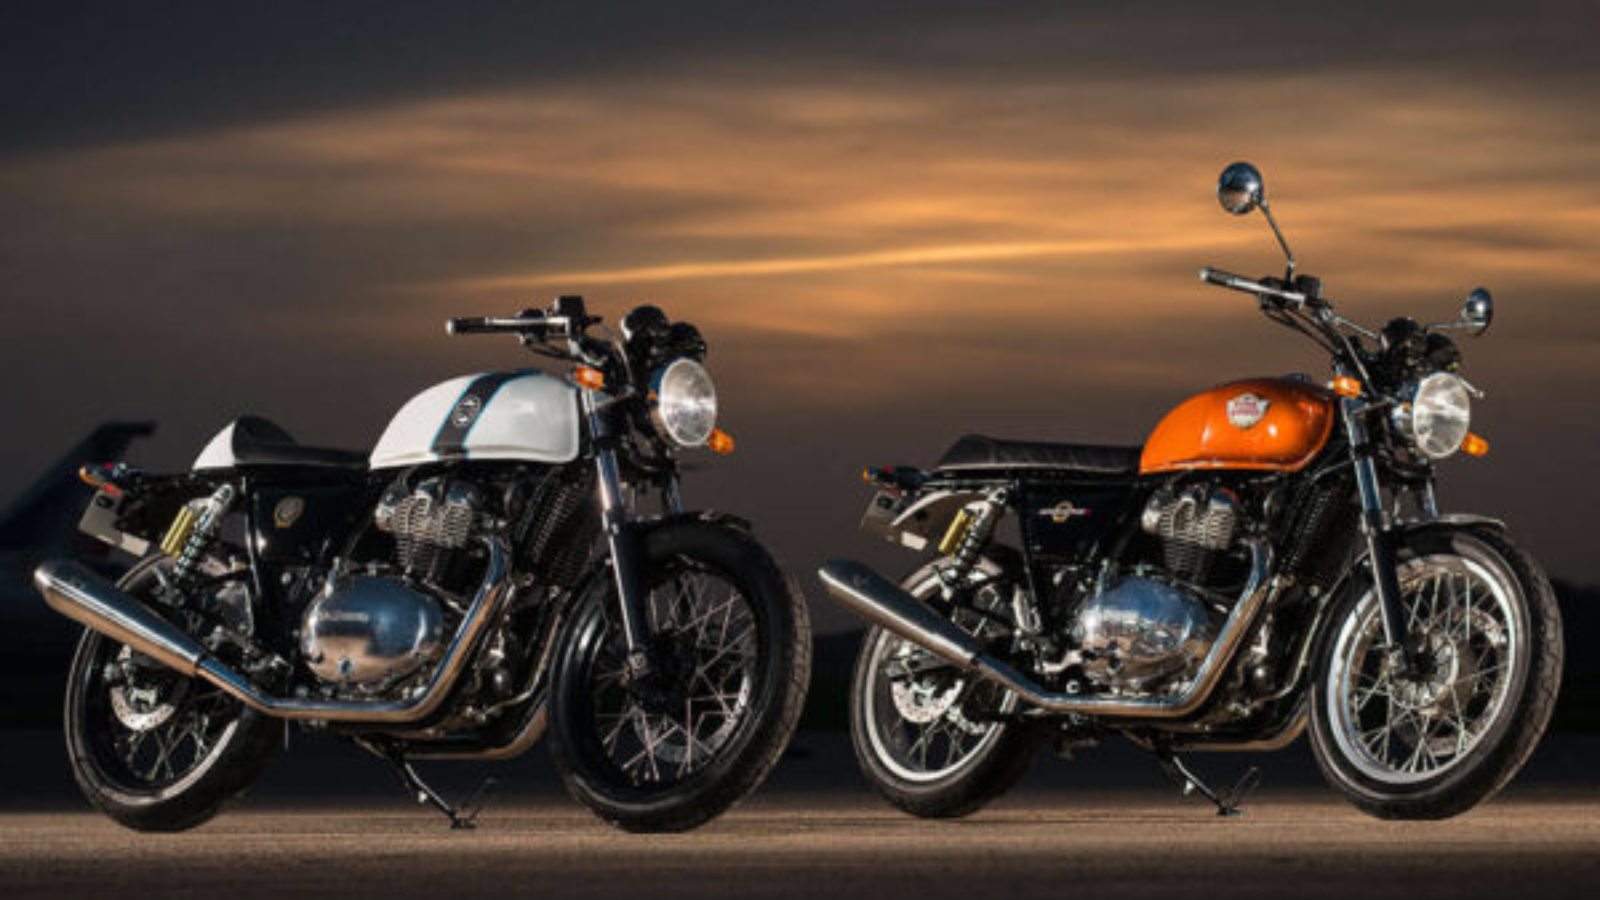 Bedre Trafikprop Stå på ski S&S Cycle Introduces 865cc and 750cc Big Bore Kits For The Royal Enfield  650 Twins | Motoroids